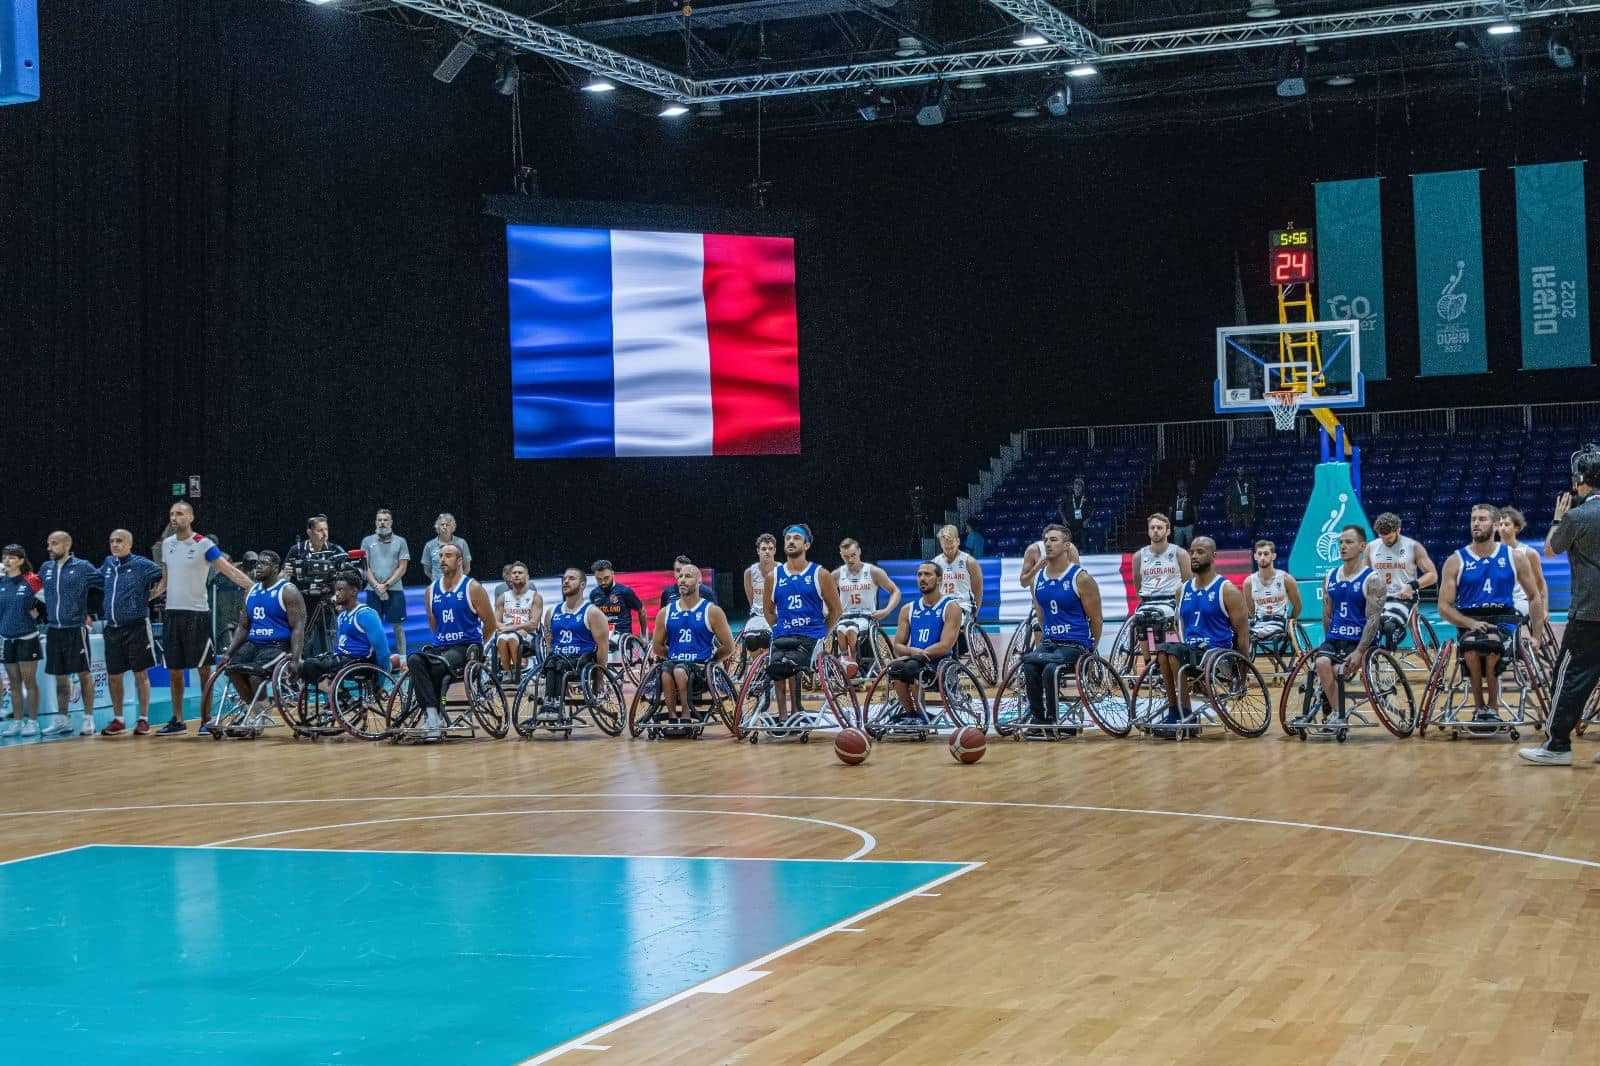 Antibes in France is due to host the Paralympic qualifier prior to the main event in the country's capital city France ©IWBF